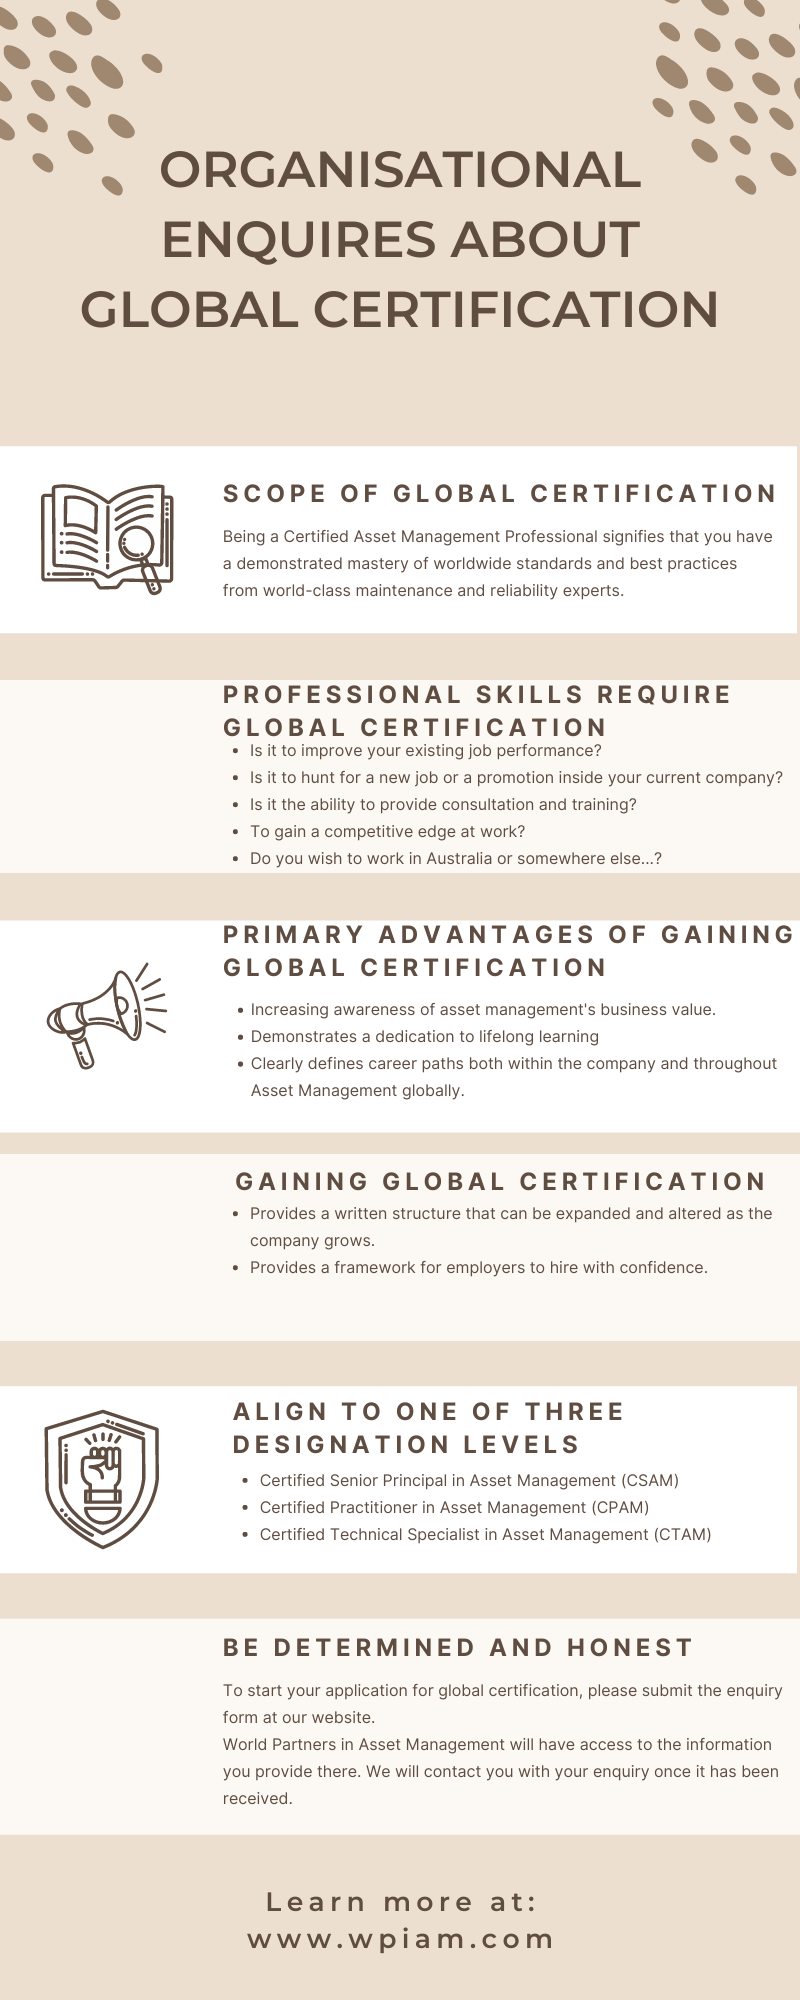 Organisational Enquires About Global Certification